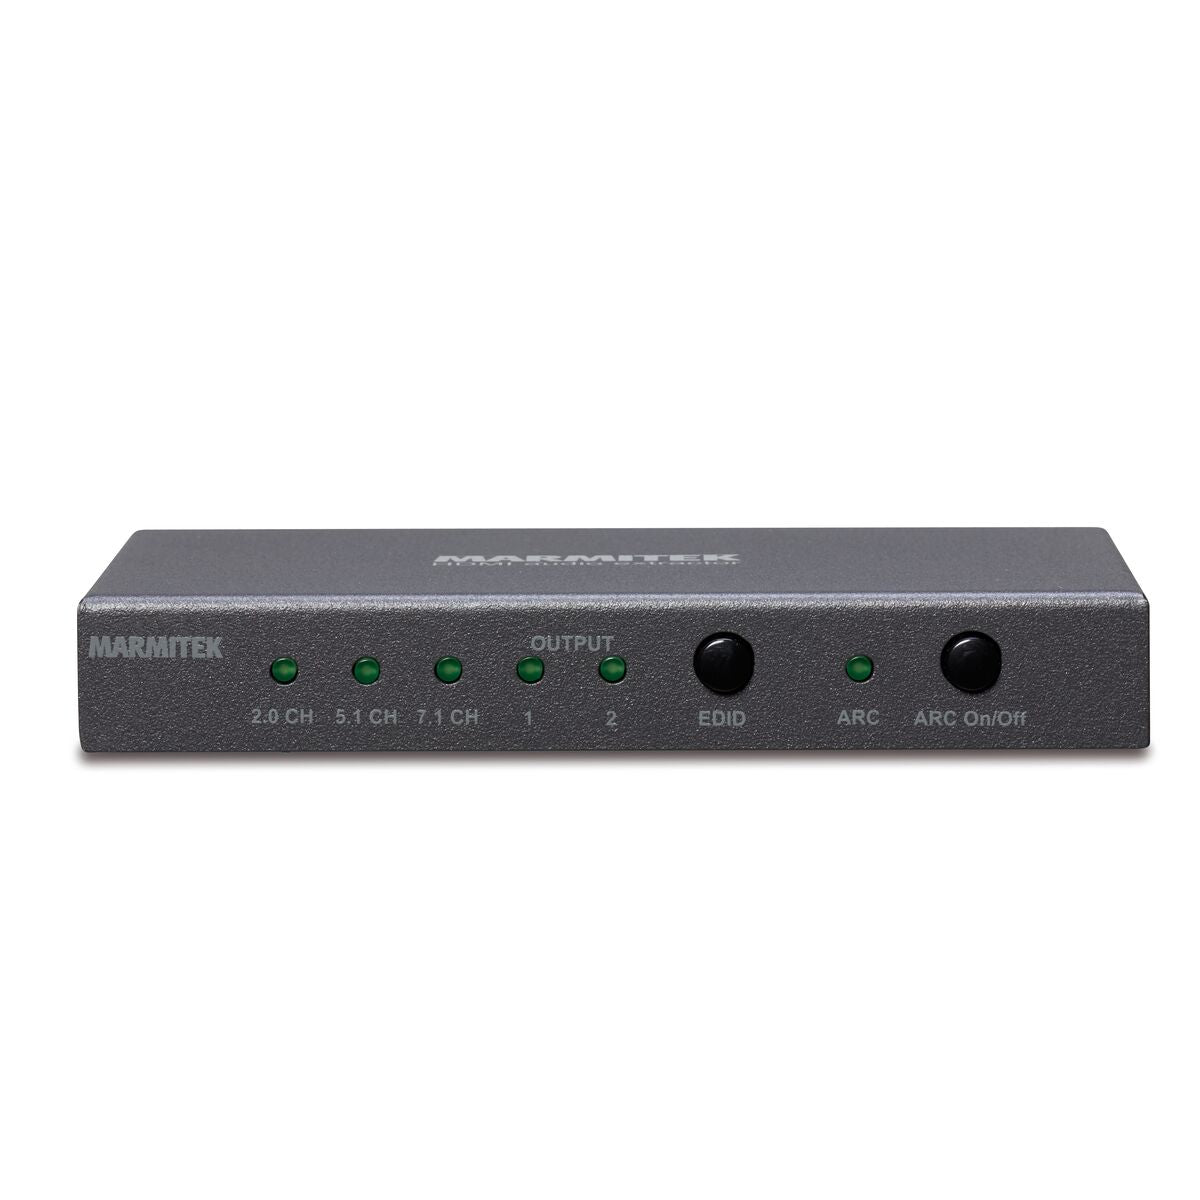 Connect AE24 UHD 2.0 - Extracteur audio HDMI 4K - 4K60 - HDR - ARC - 18 Gbps